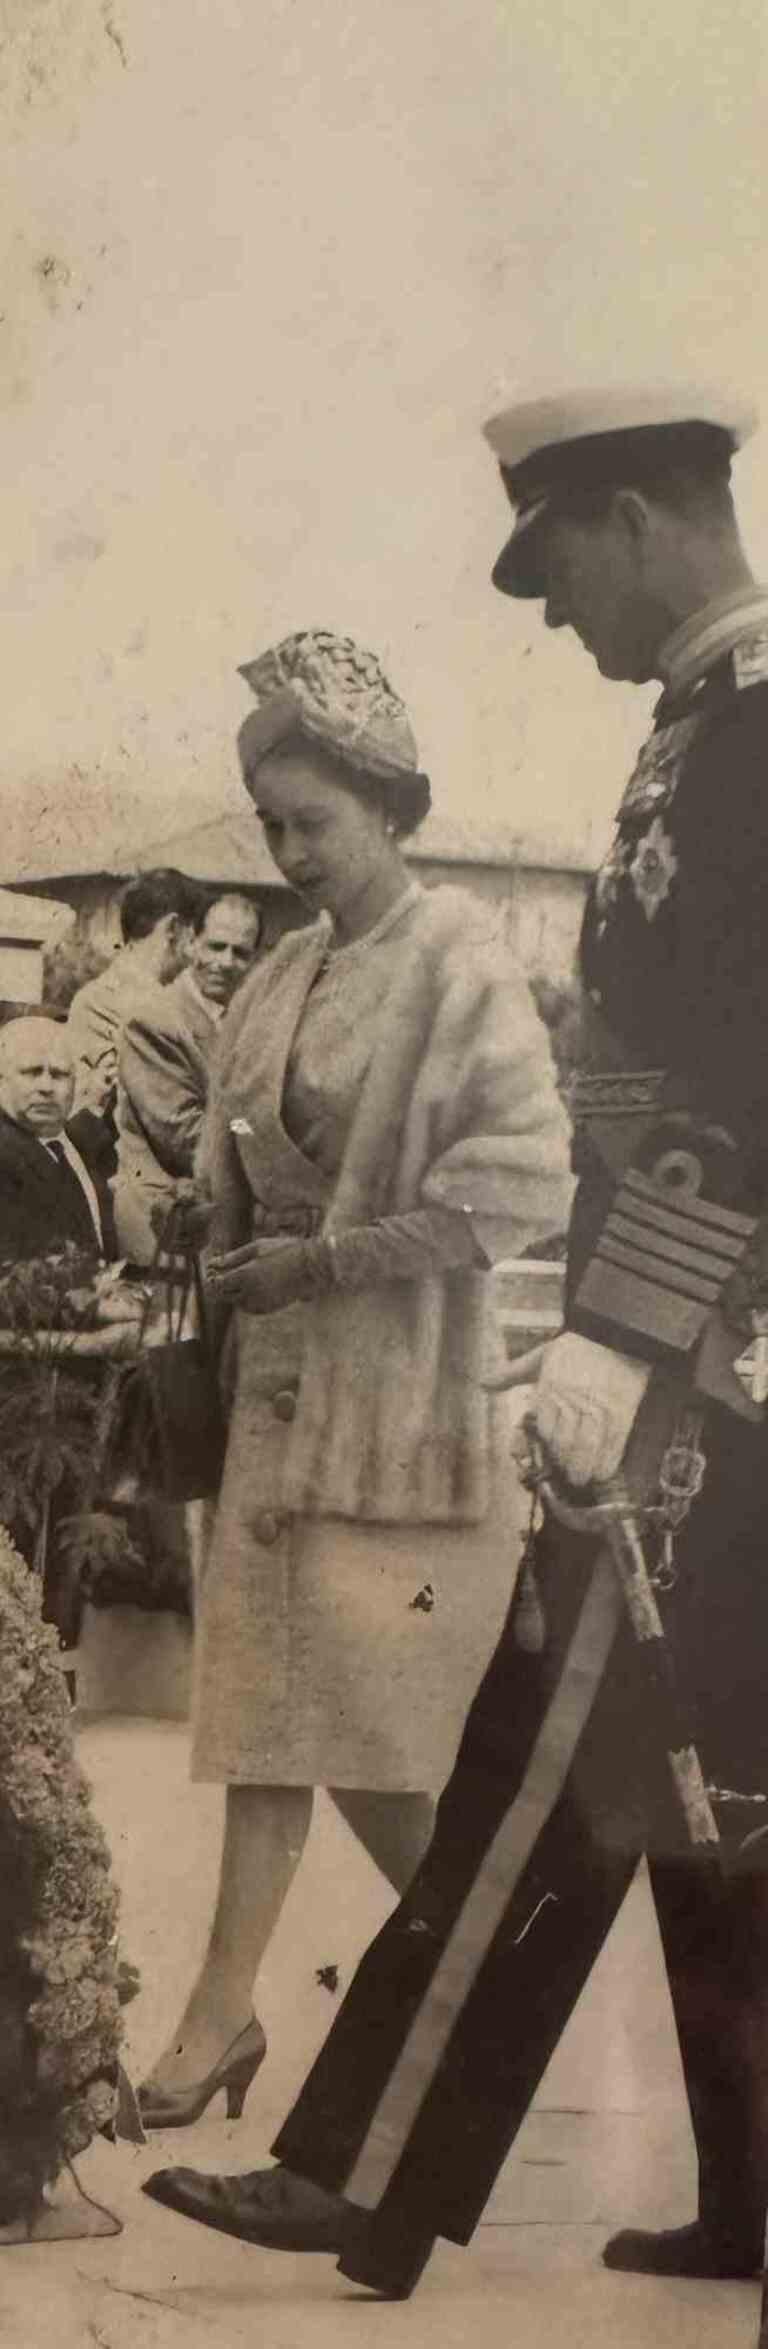 Unknown Figurative Photograph - The Old Days Photo - Queen Elizabeth - Vintage Photo - Mid-20th Century